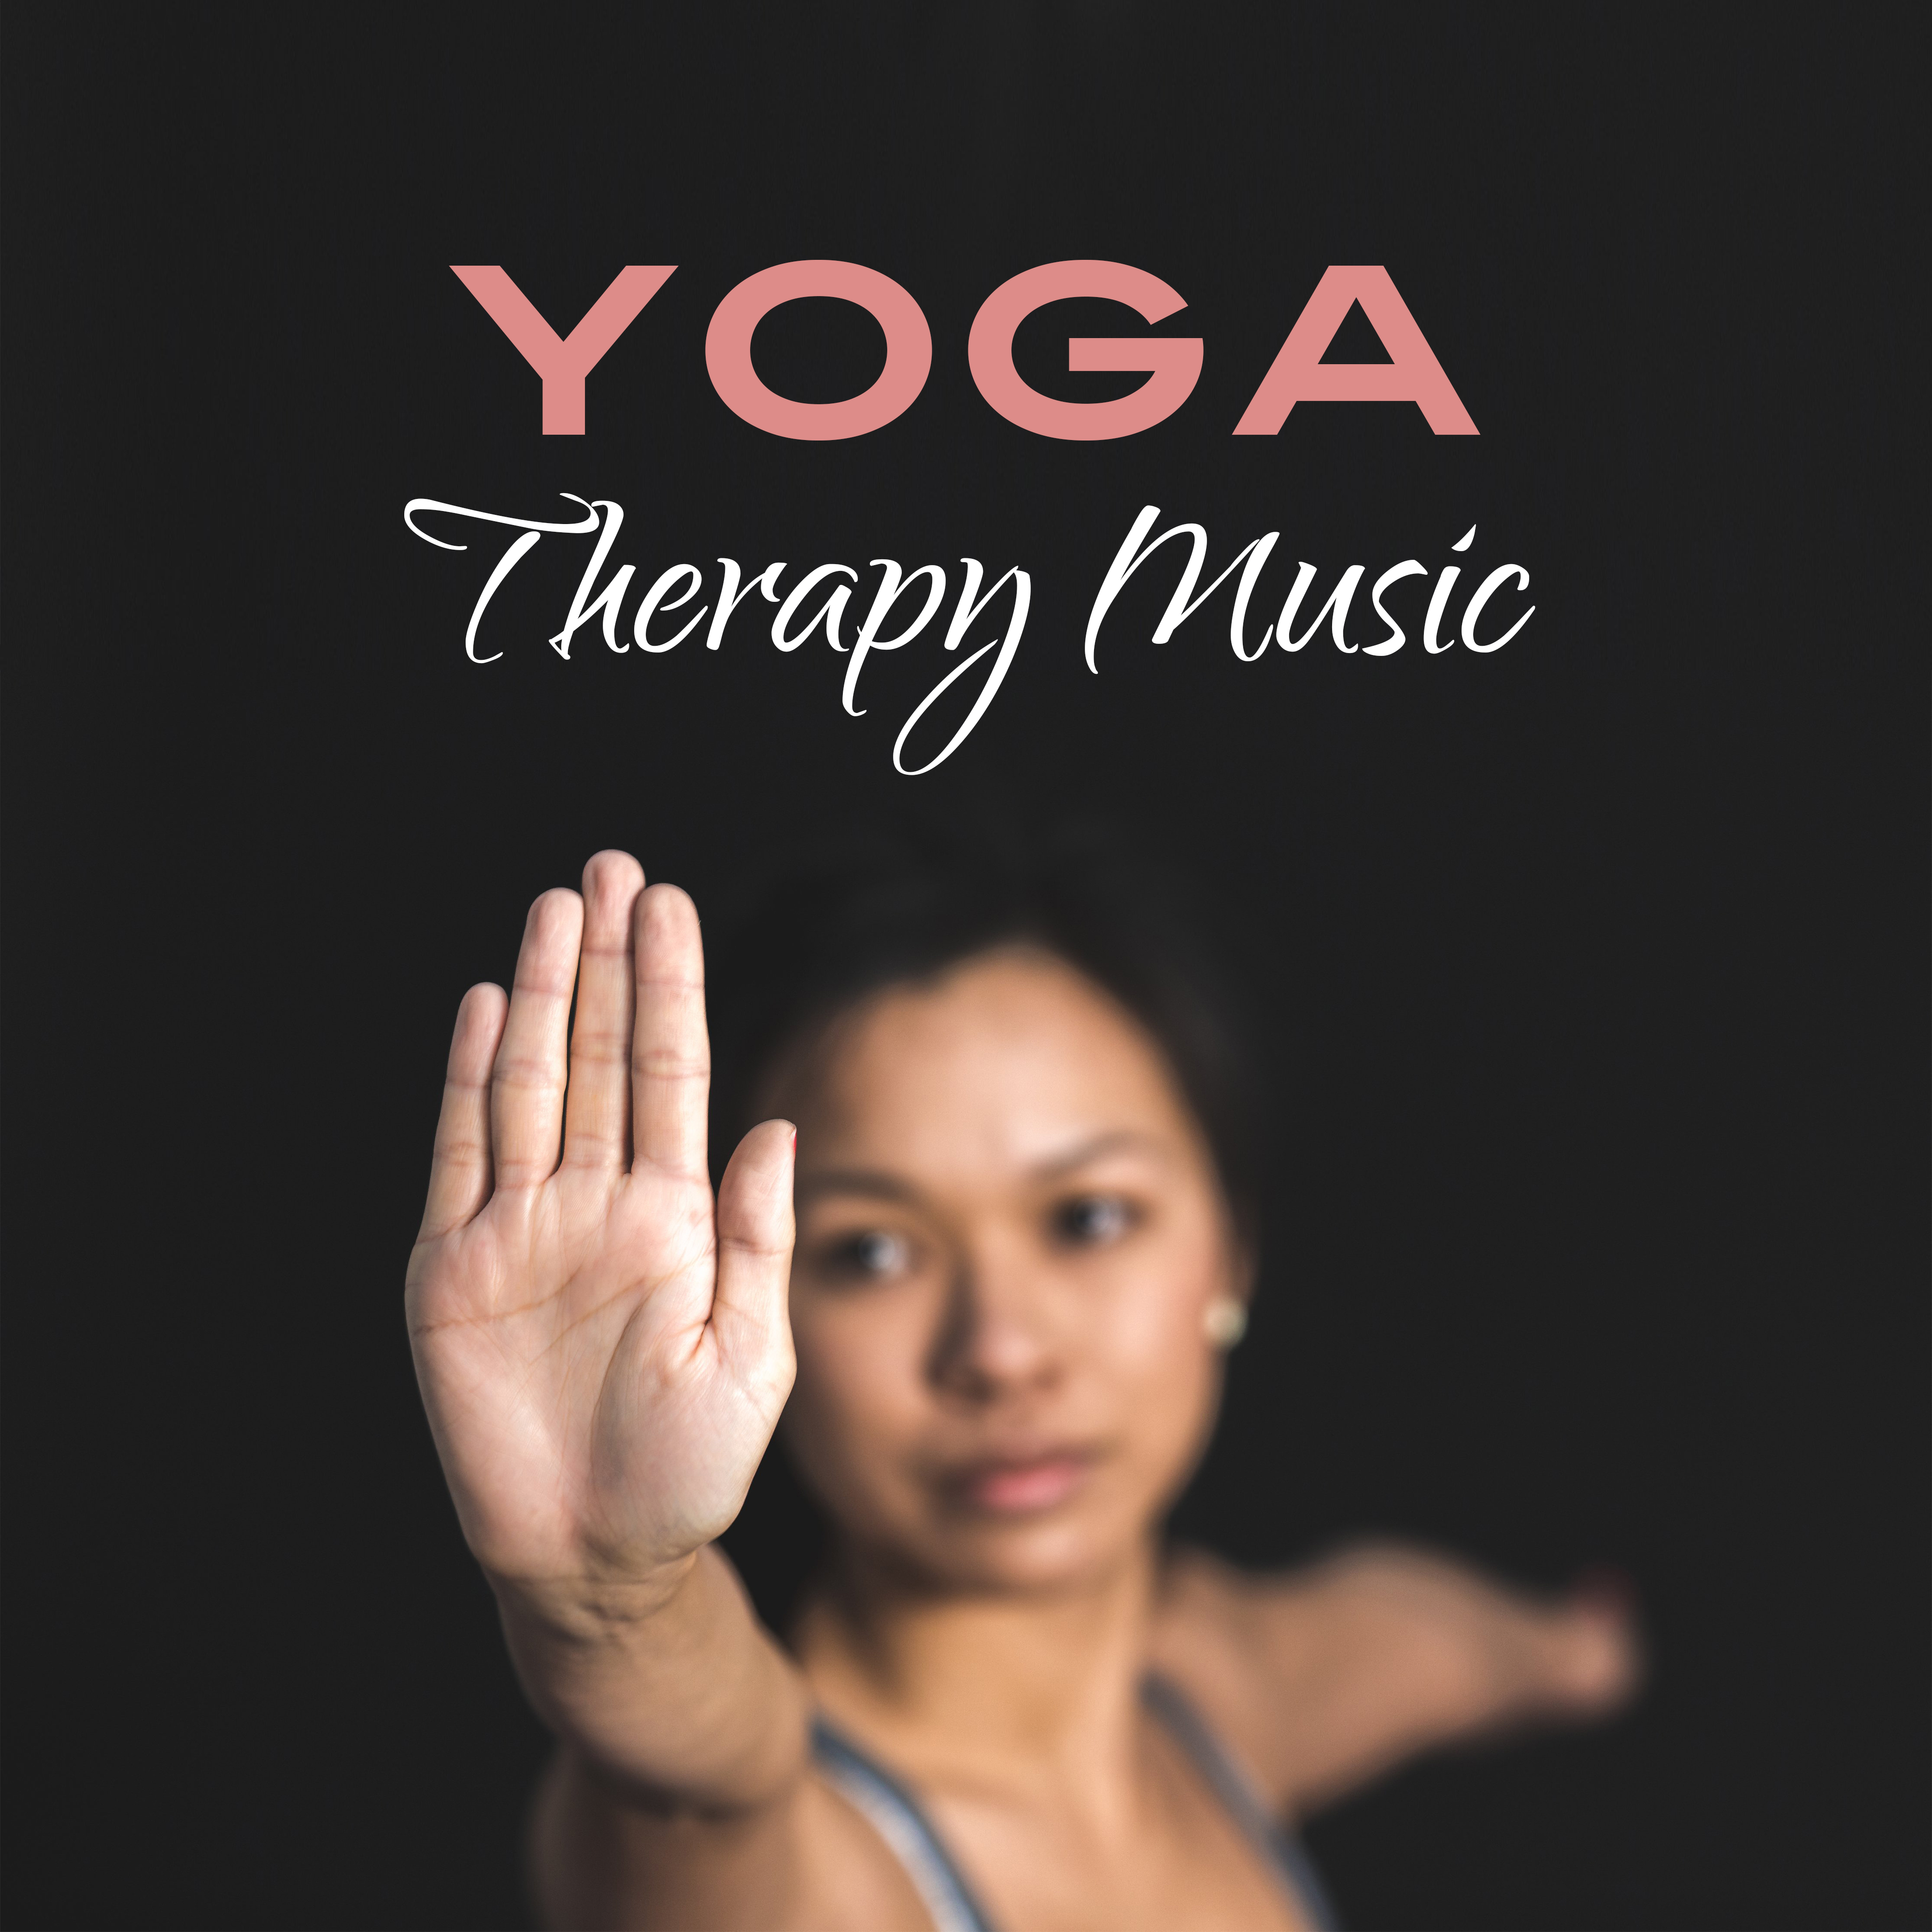 Yoga Therapy Music – Traditional New Age Music for Yoga Meditation, Zen, Healing Nature Sounds